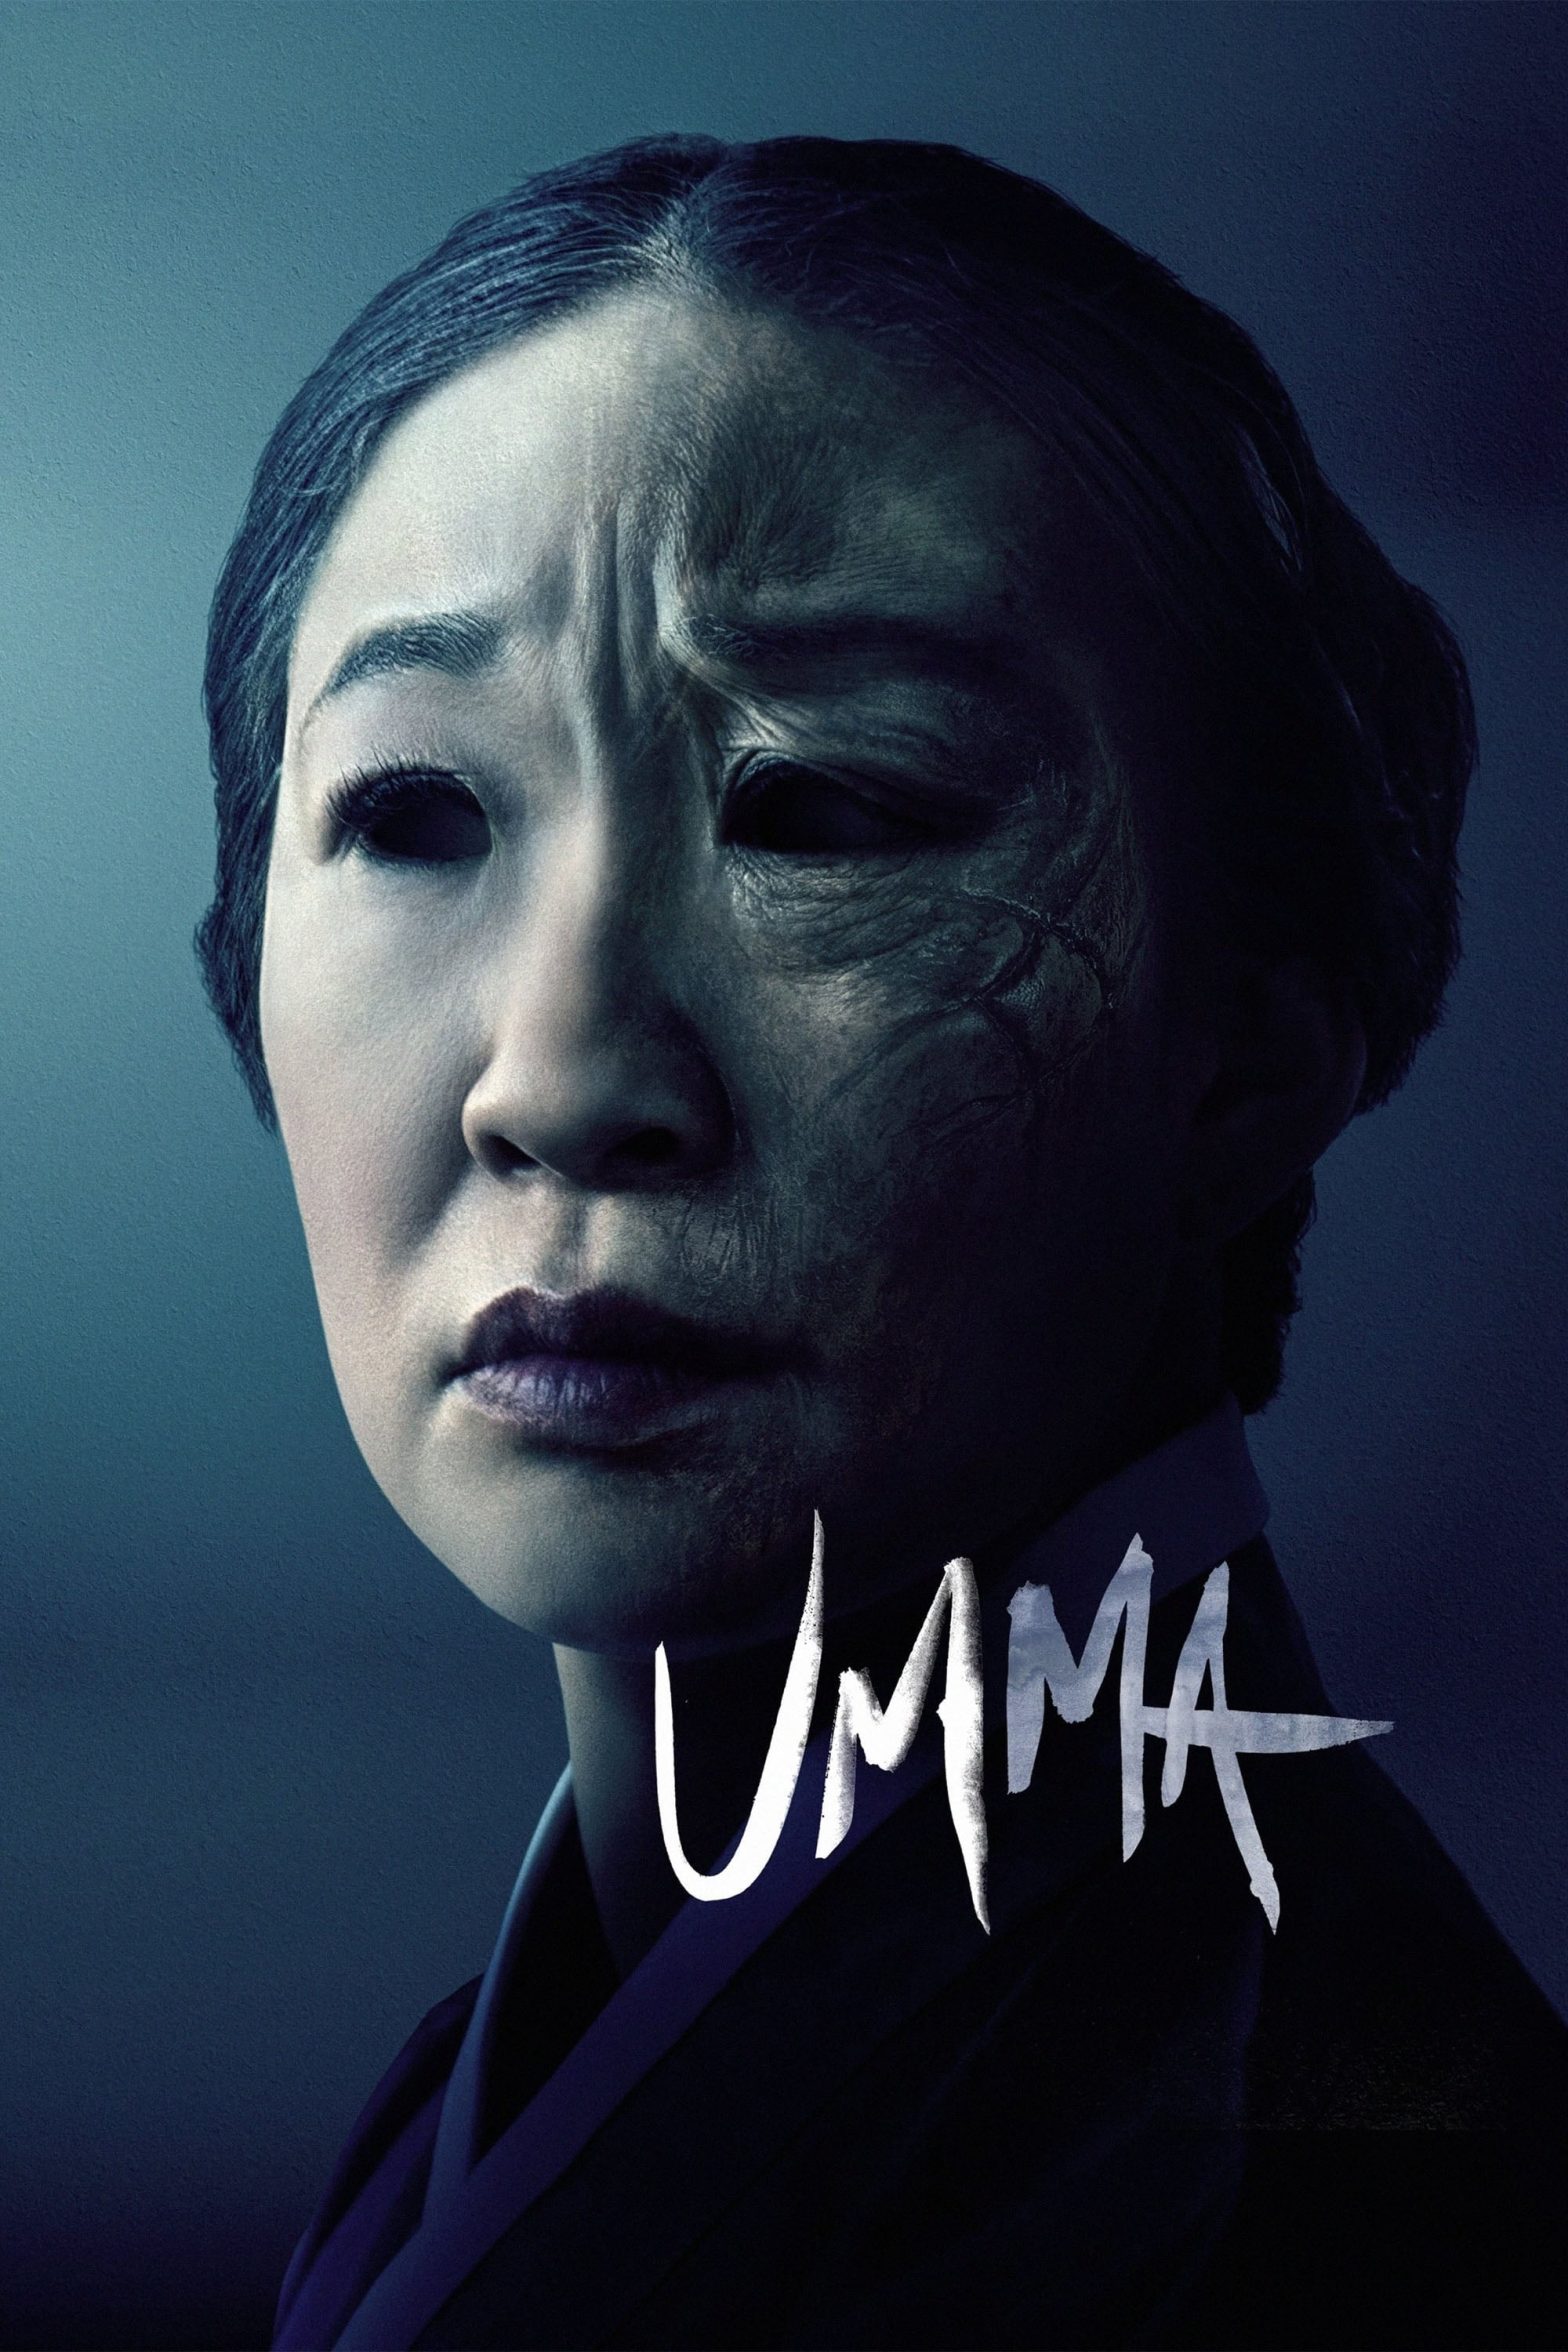 Poster for the movie "Umma"